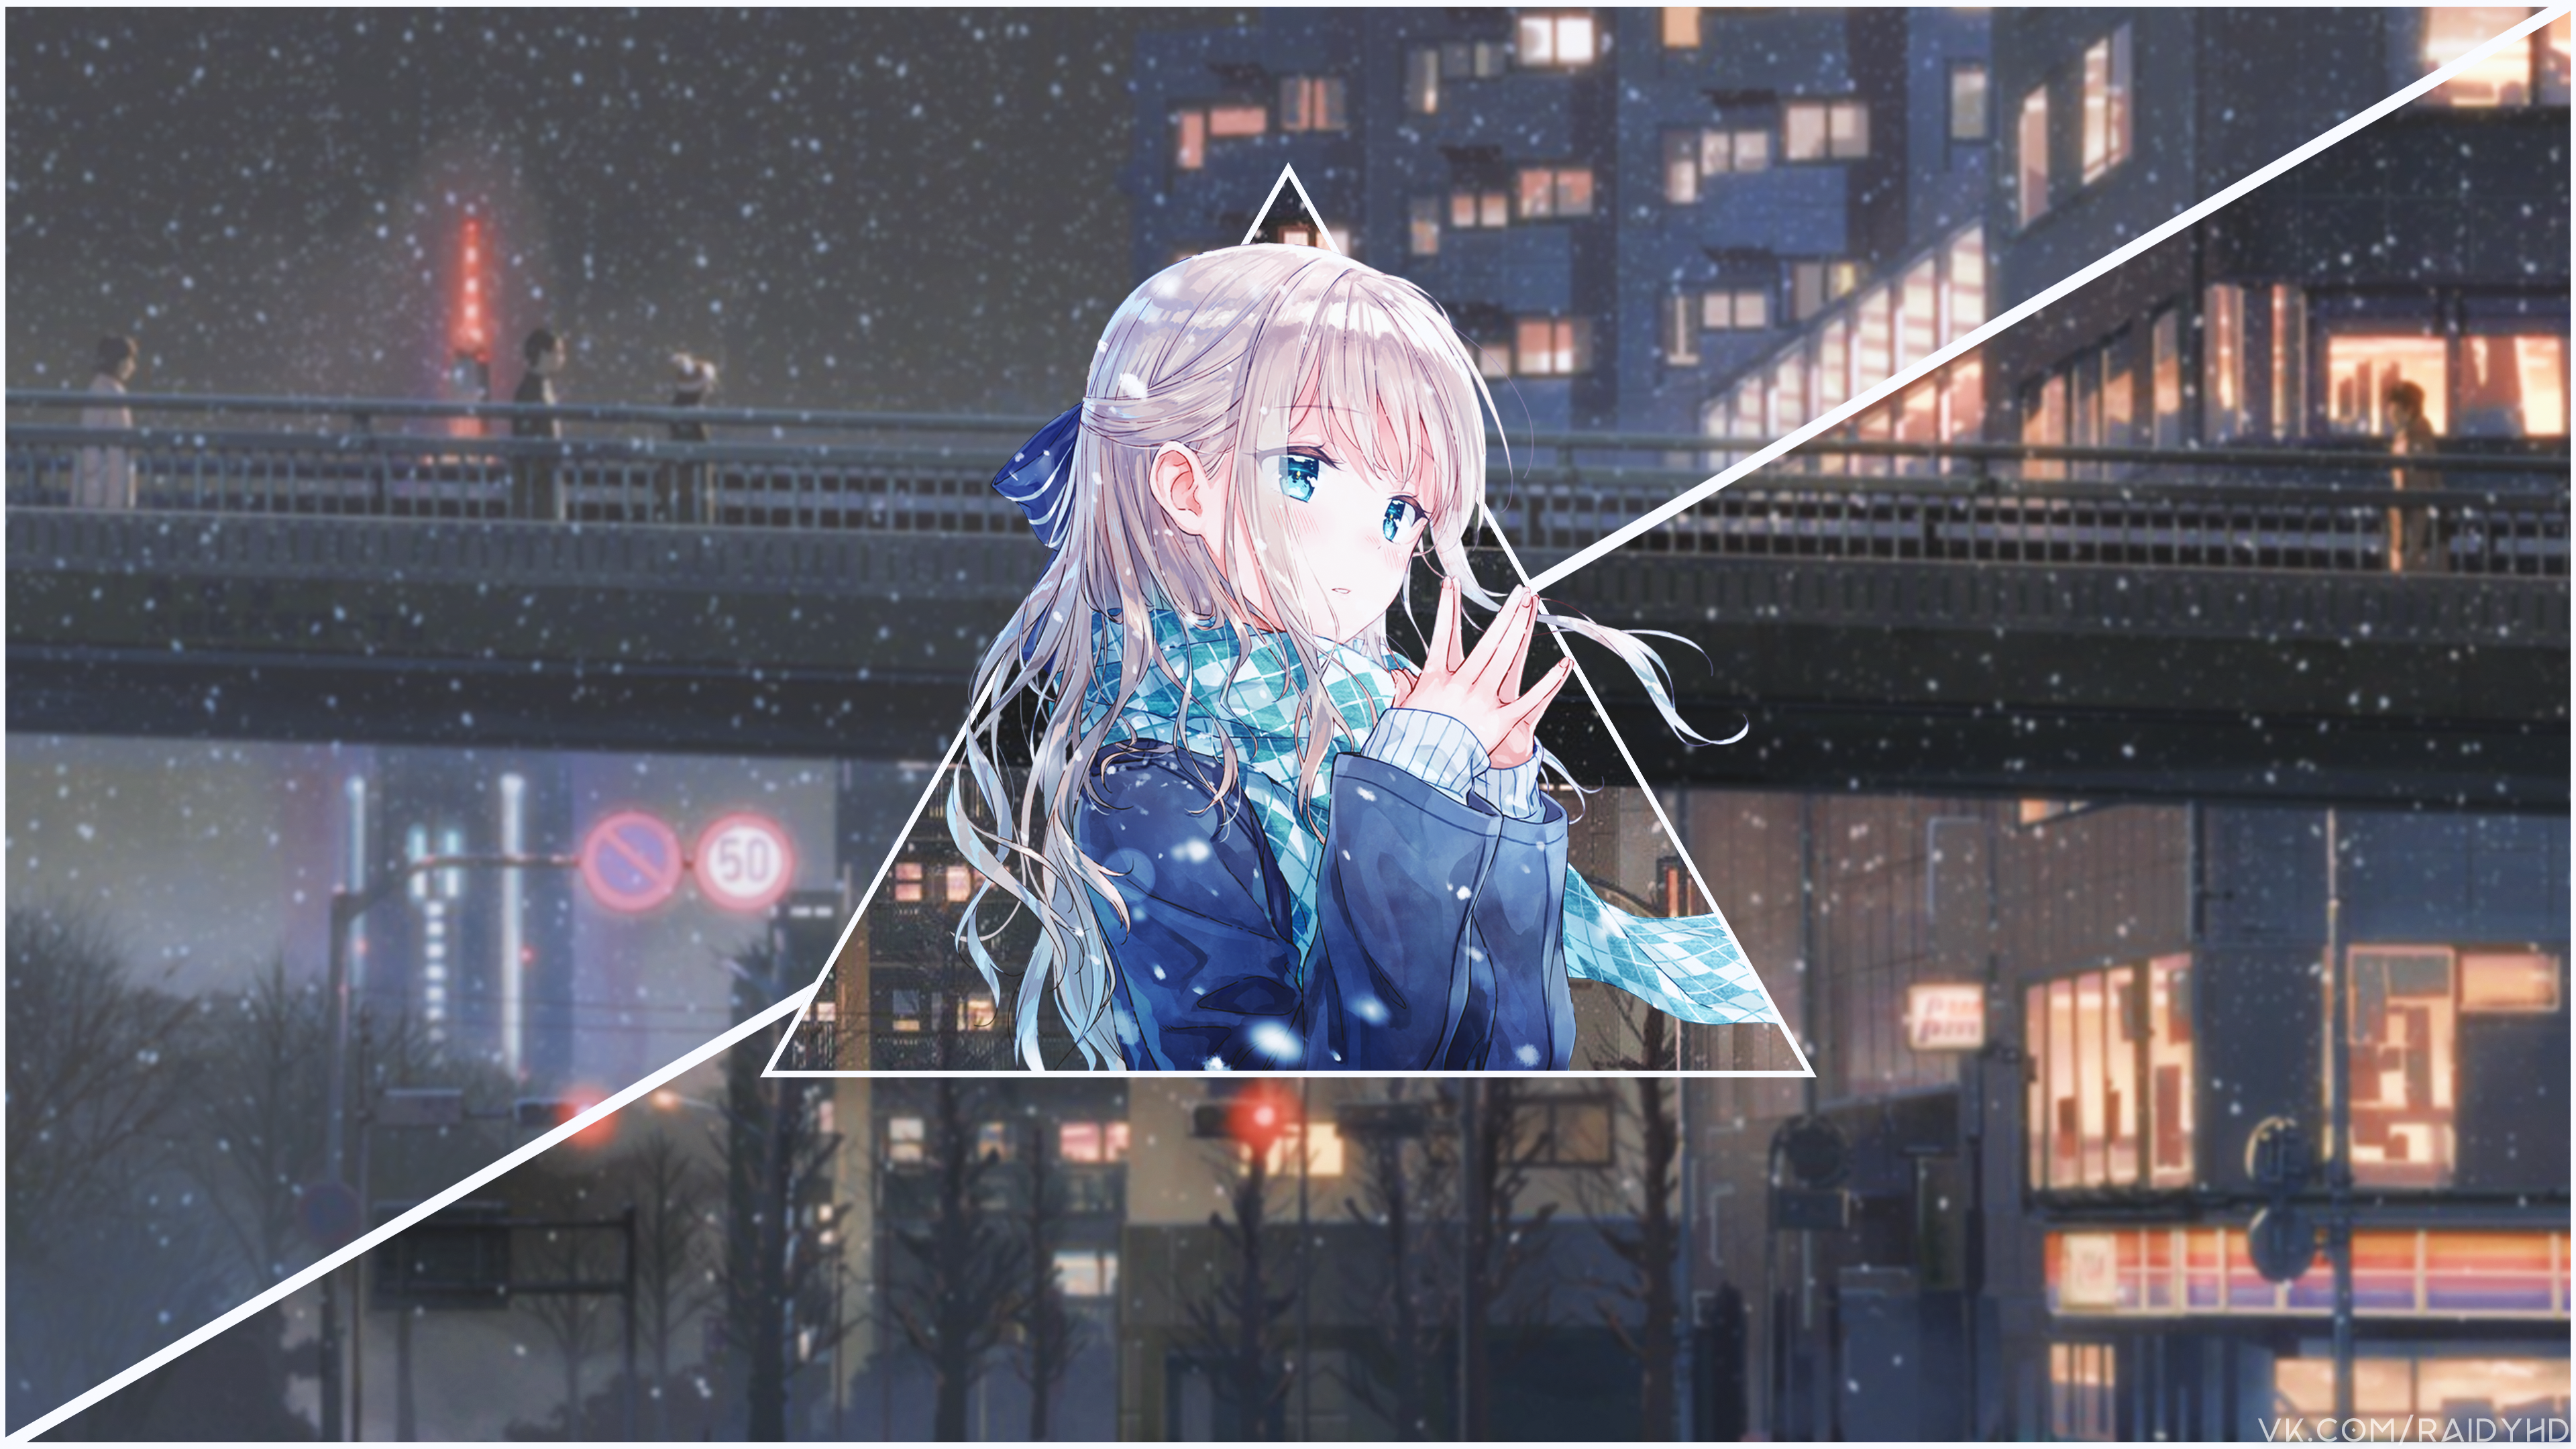 Anime 3840x2160 anime anime girls picture-in-picture snow scarf Hiten